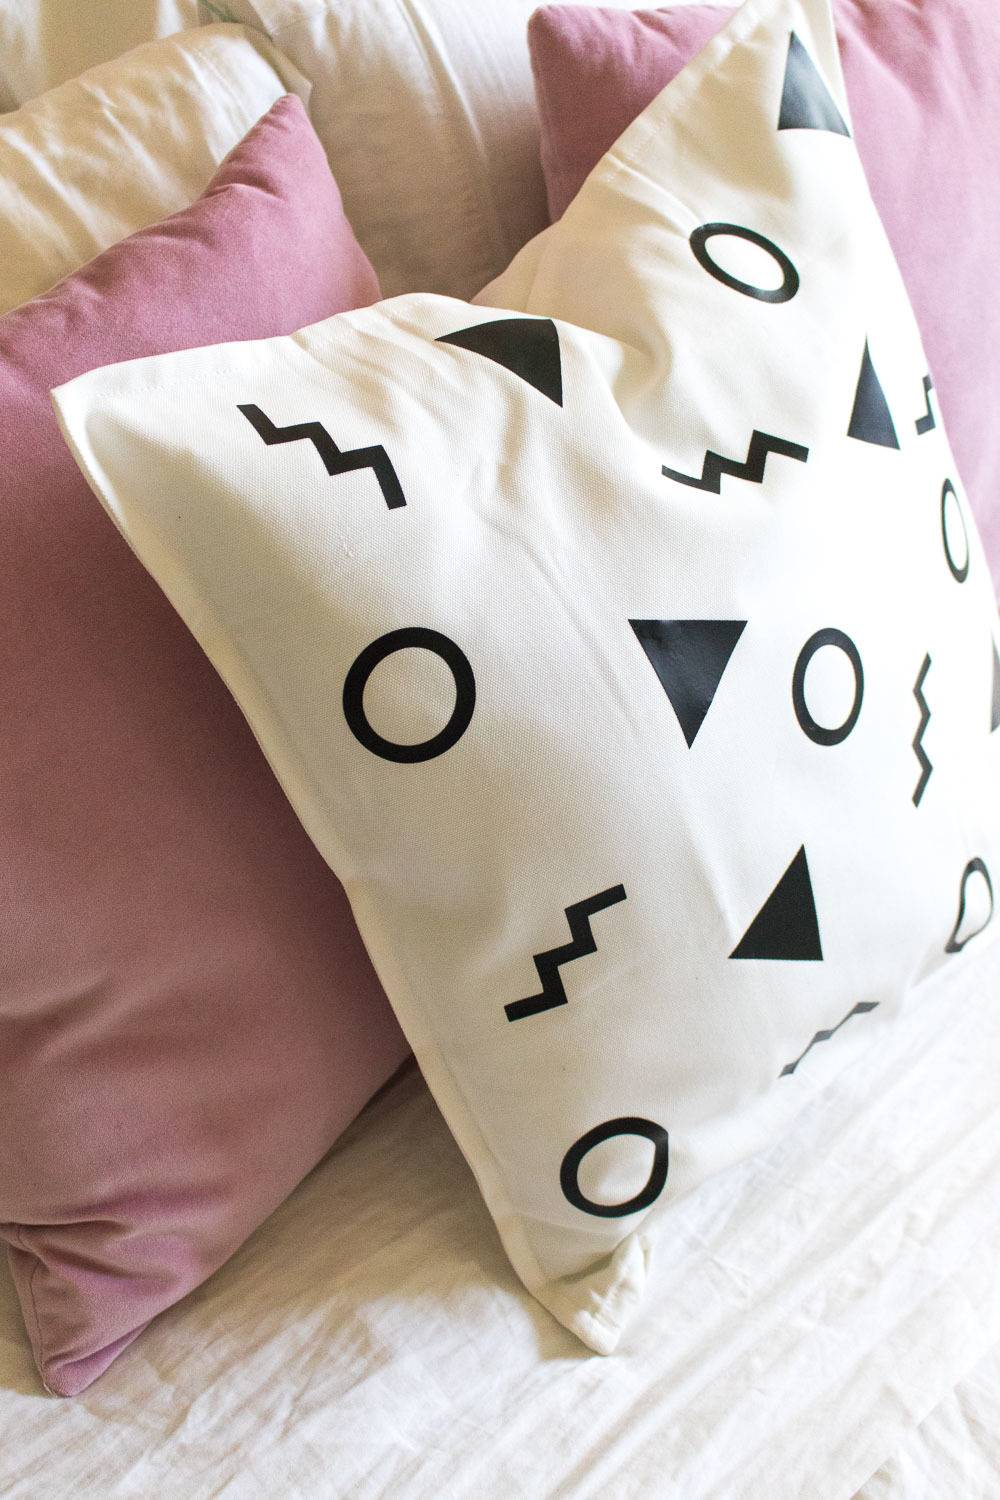 A white pillow with black triangles, circles and squigels sits in front of two pink pillows on a bed.